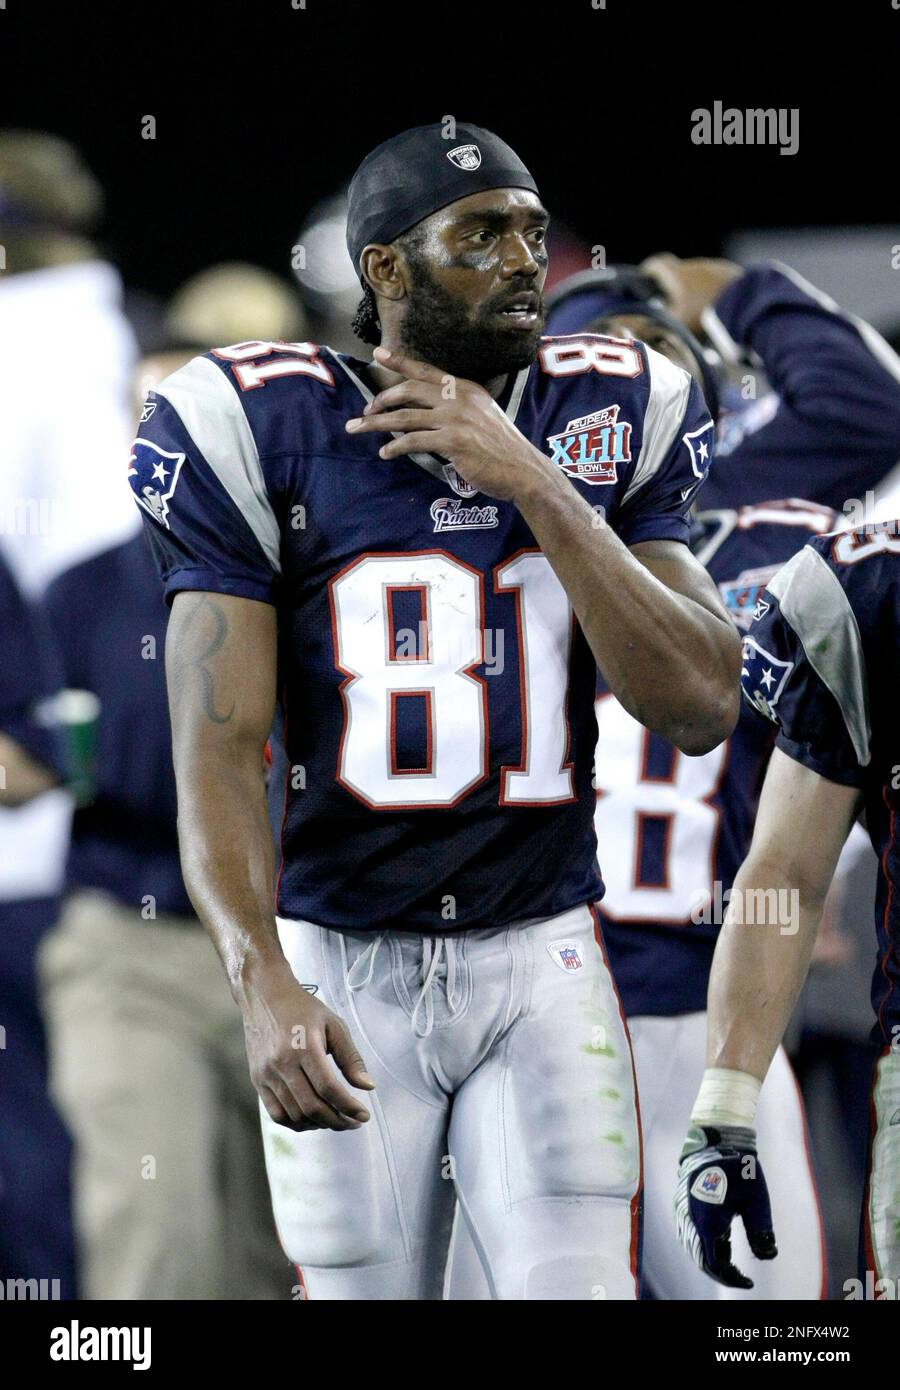 New England Patriots receiver Randy Moss (81) looks on from the sidelines  in the fourth quarter during the Super Bowl XLII football game against the  New York Giants at University of Phoenix